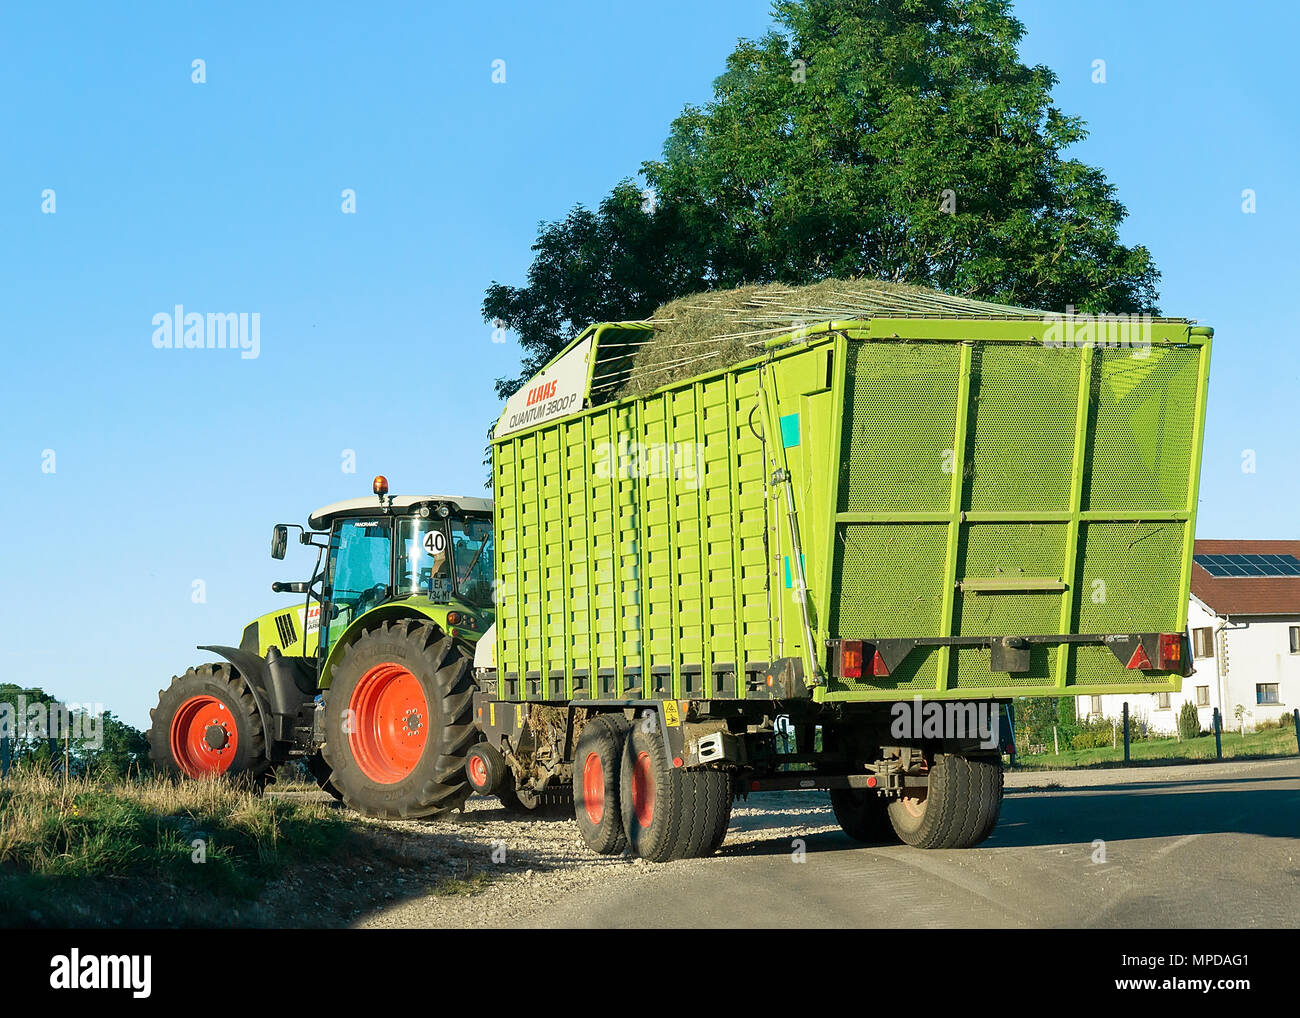 Ouhans, France - August, 25, 2016: Tractor with trailer full of hay on the road in Bourgogne-Franche-Comte region, France. Stock Photo